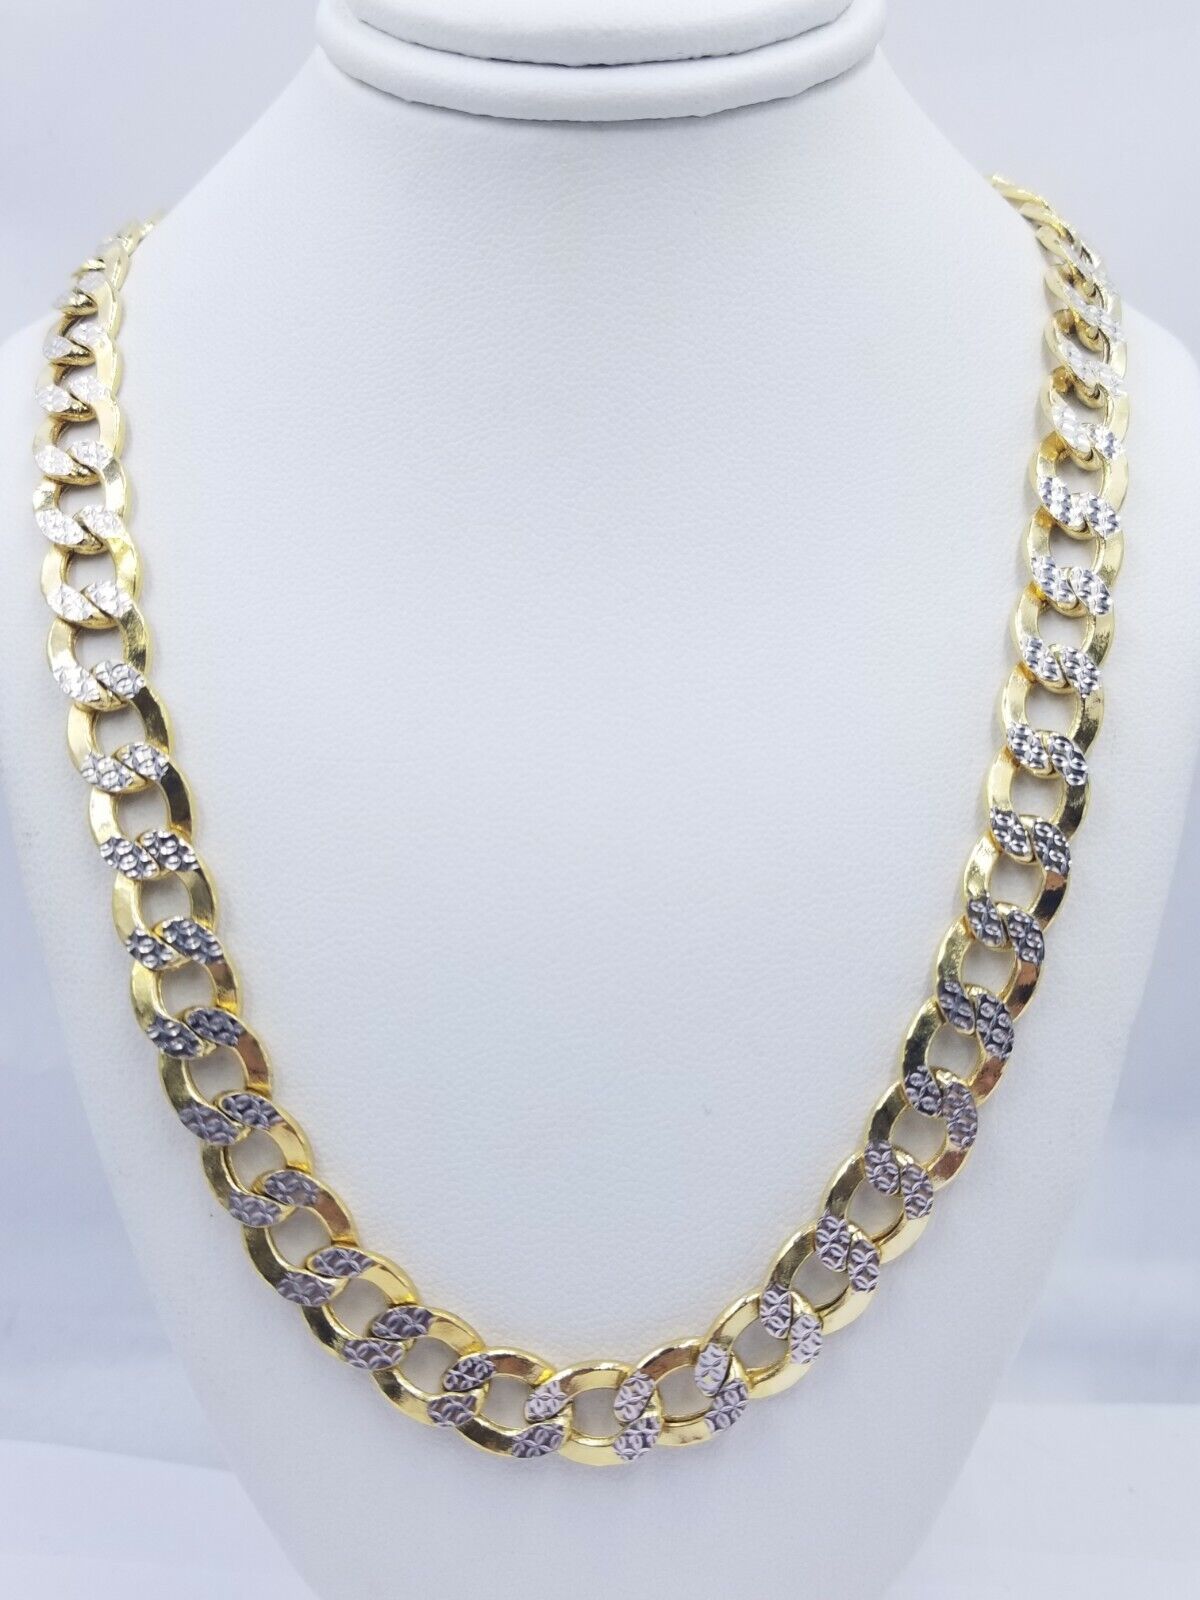 12MM Real Gold Mens Necklace Cuban Link 20-30" Diamond Cut 10k Yellow Gold Chain